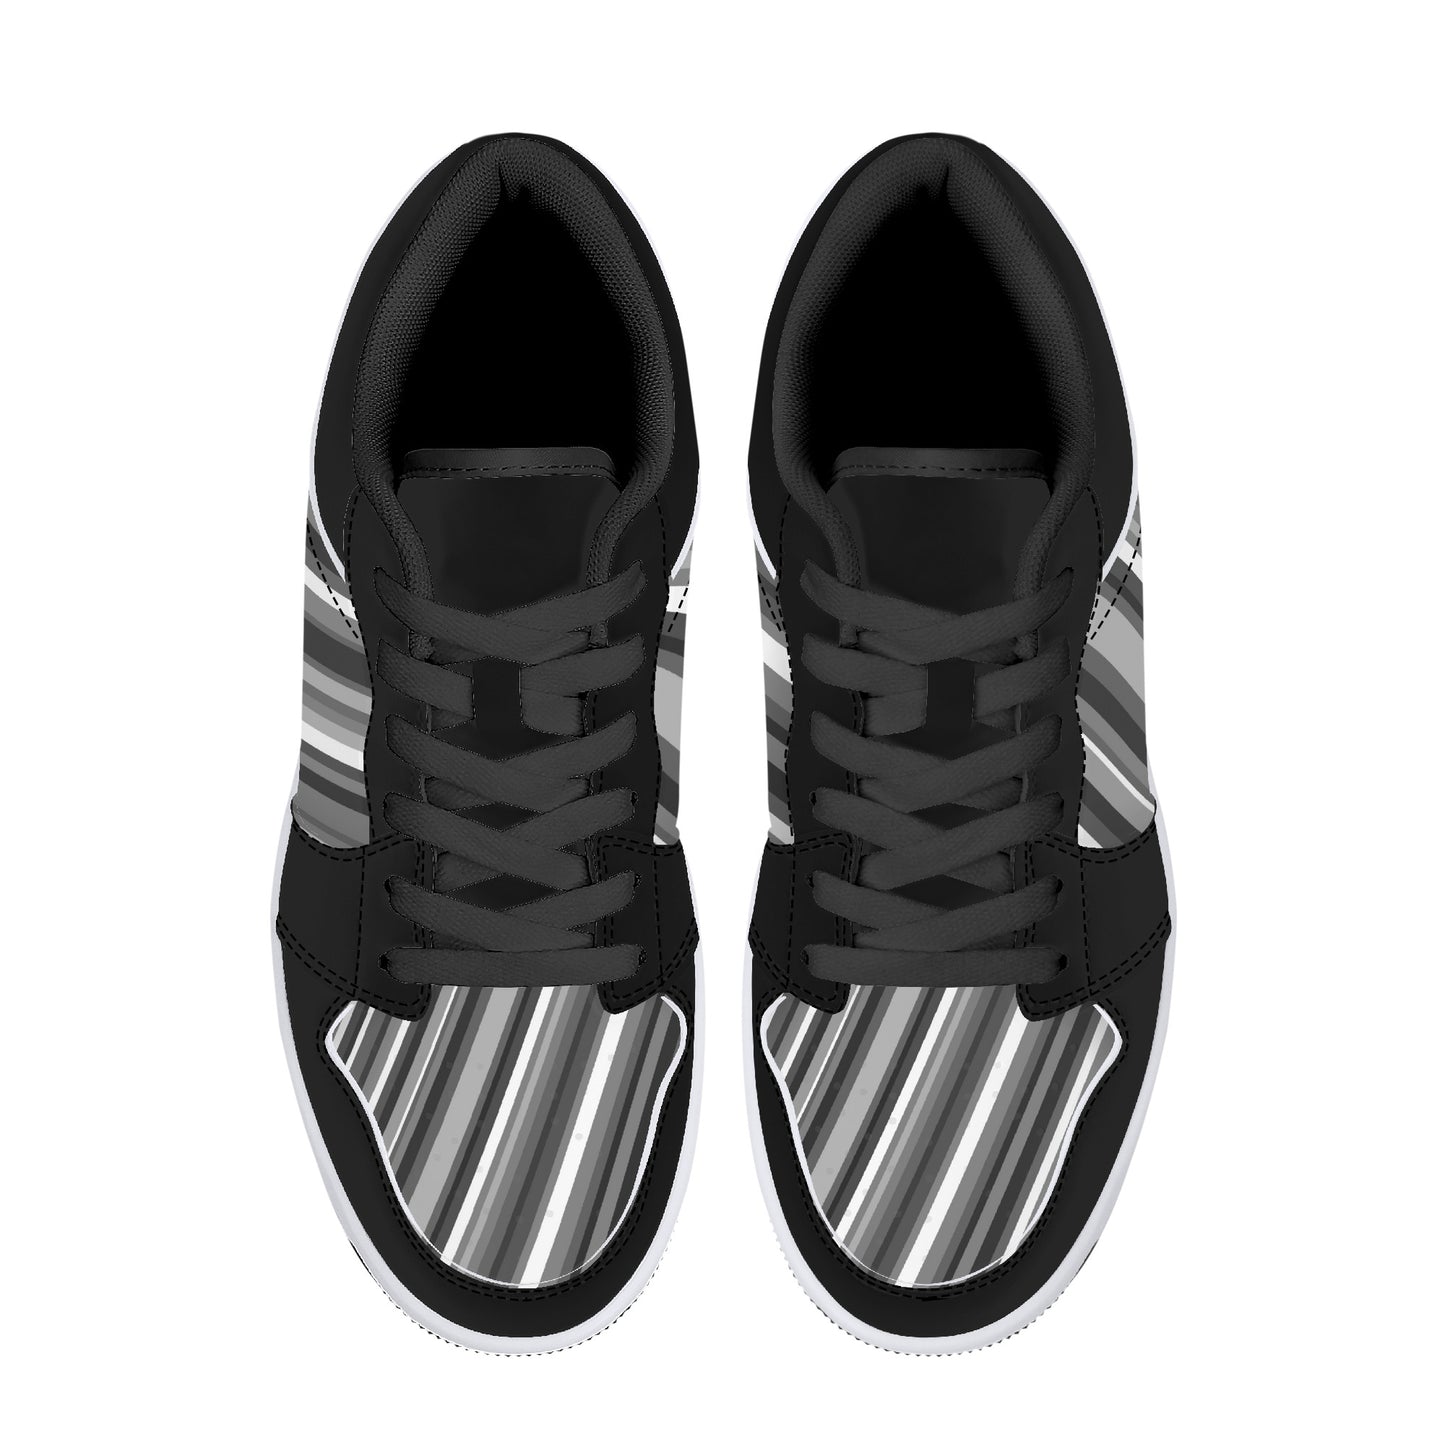 Leather Sneakers - Black & Grey Stripes